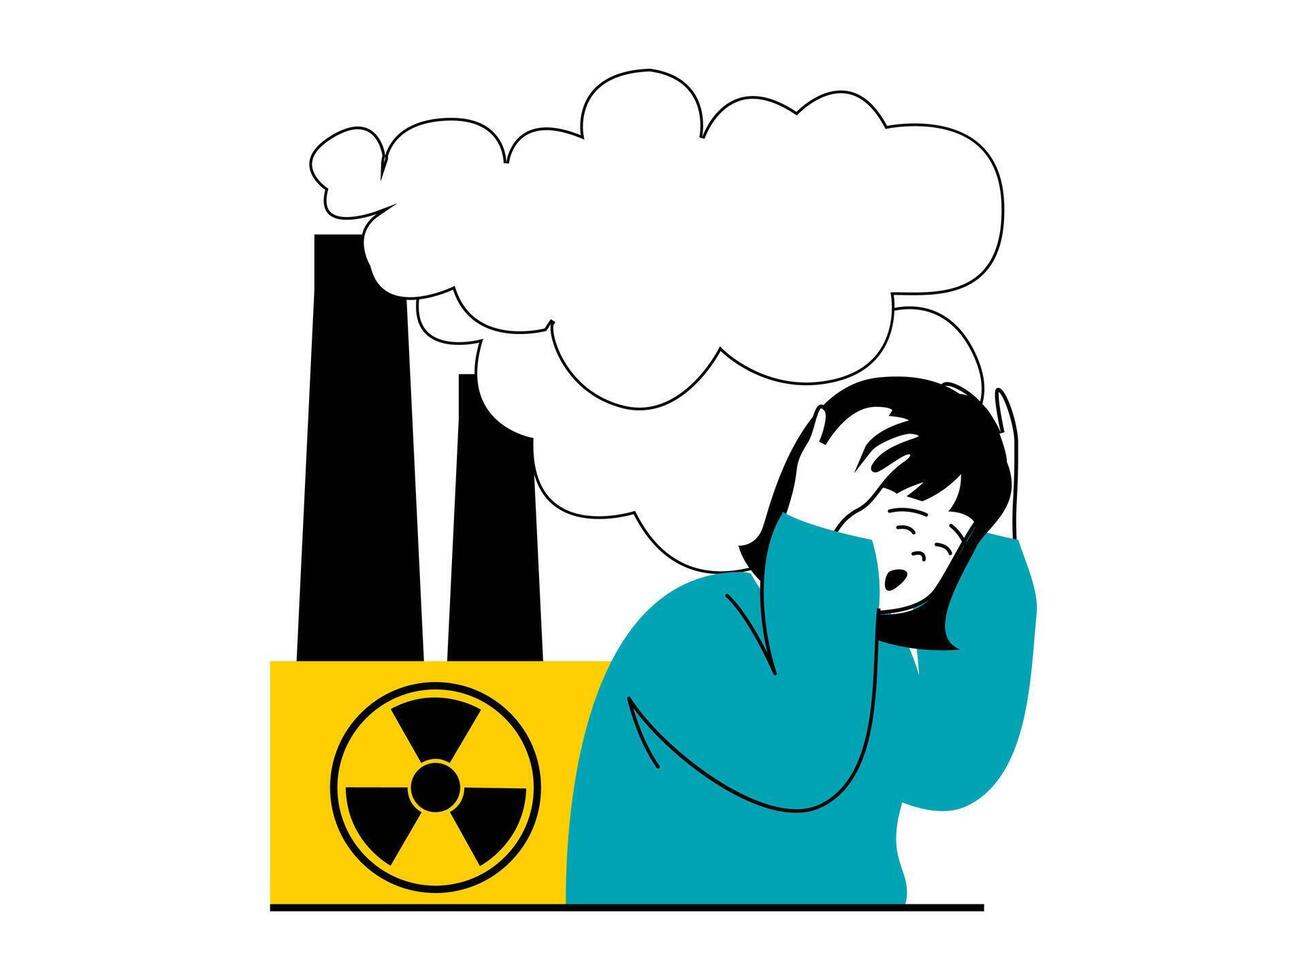 Save Earth concept with character situation. Woman suffers from toxic gas and dust emissions into air from industrial plants and factory. Vector illustration with people scene in flat design for web